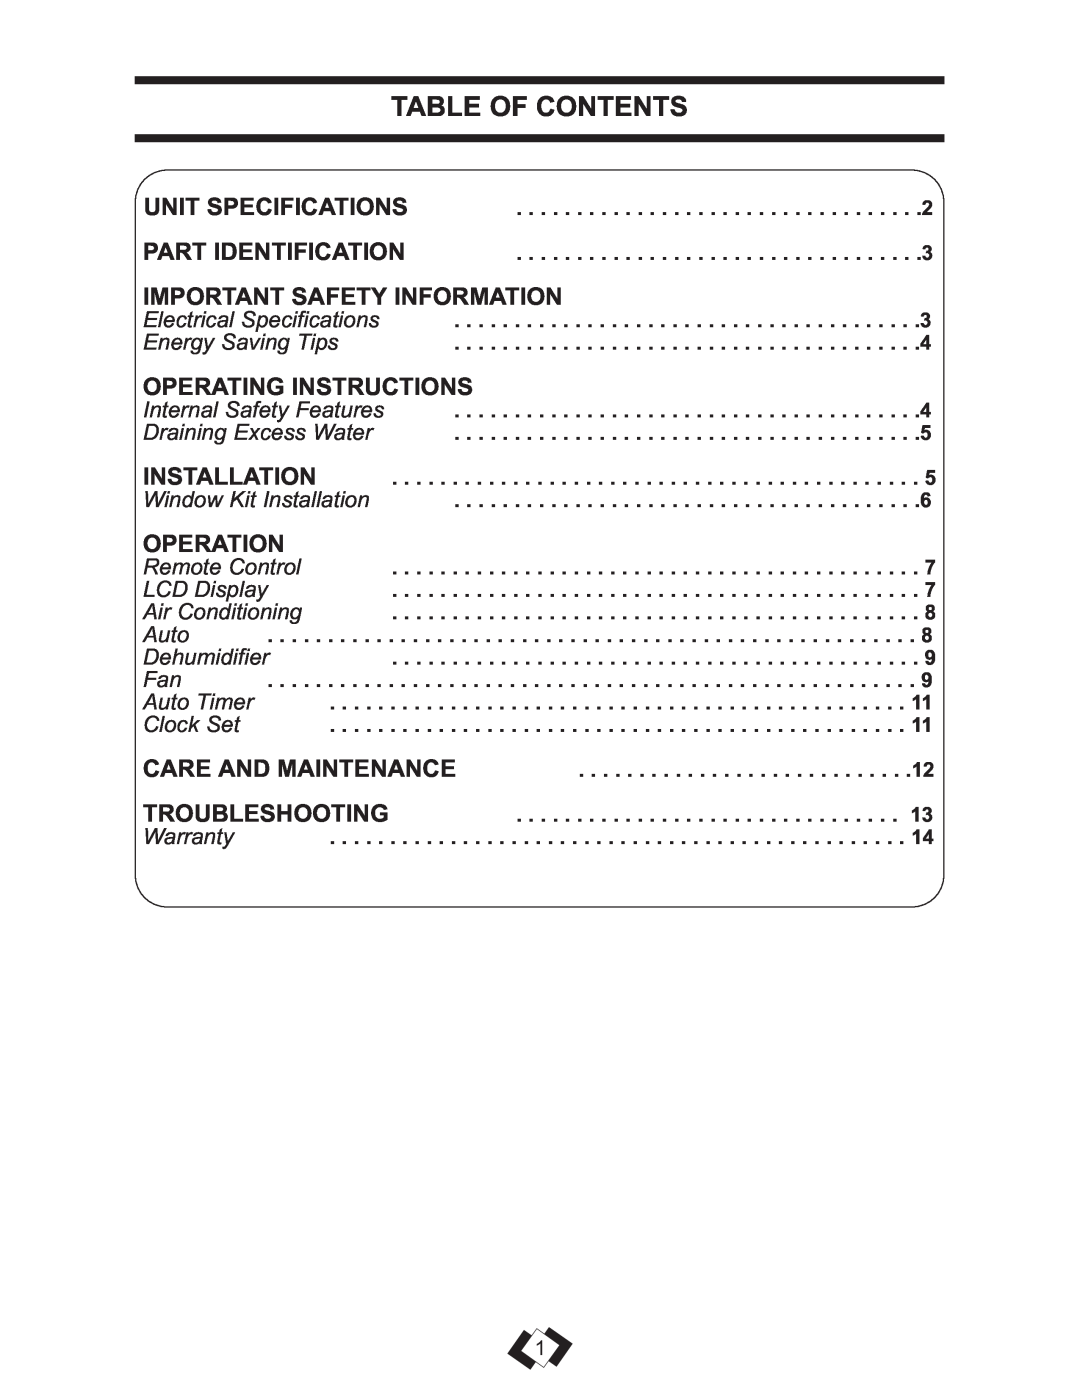 Danby DPAC 13009 operating instructions Table Of Contents, Important Safety Information, Operating Instructions, Operation 